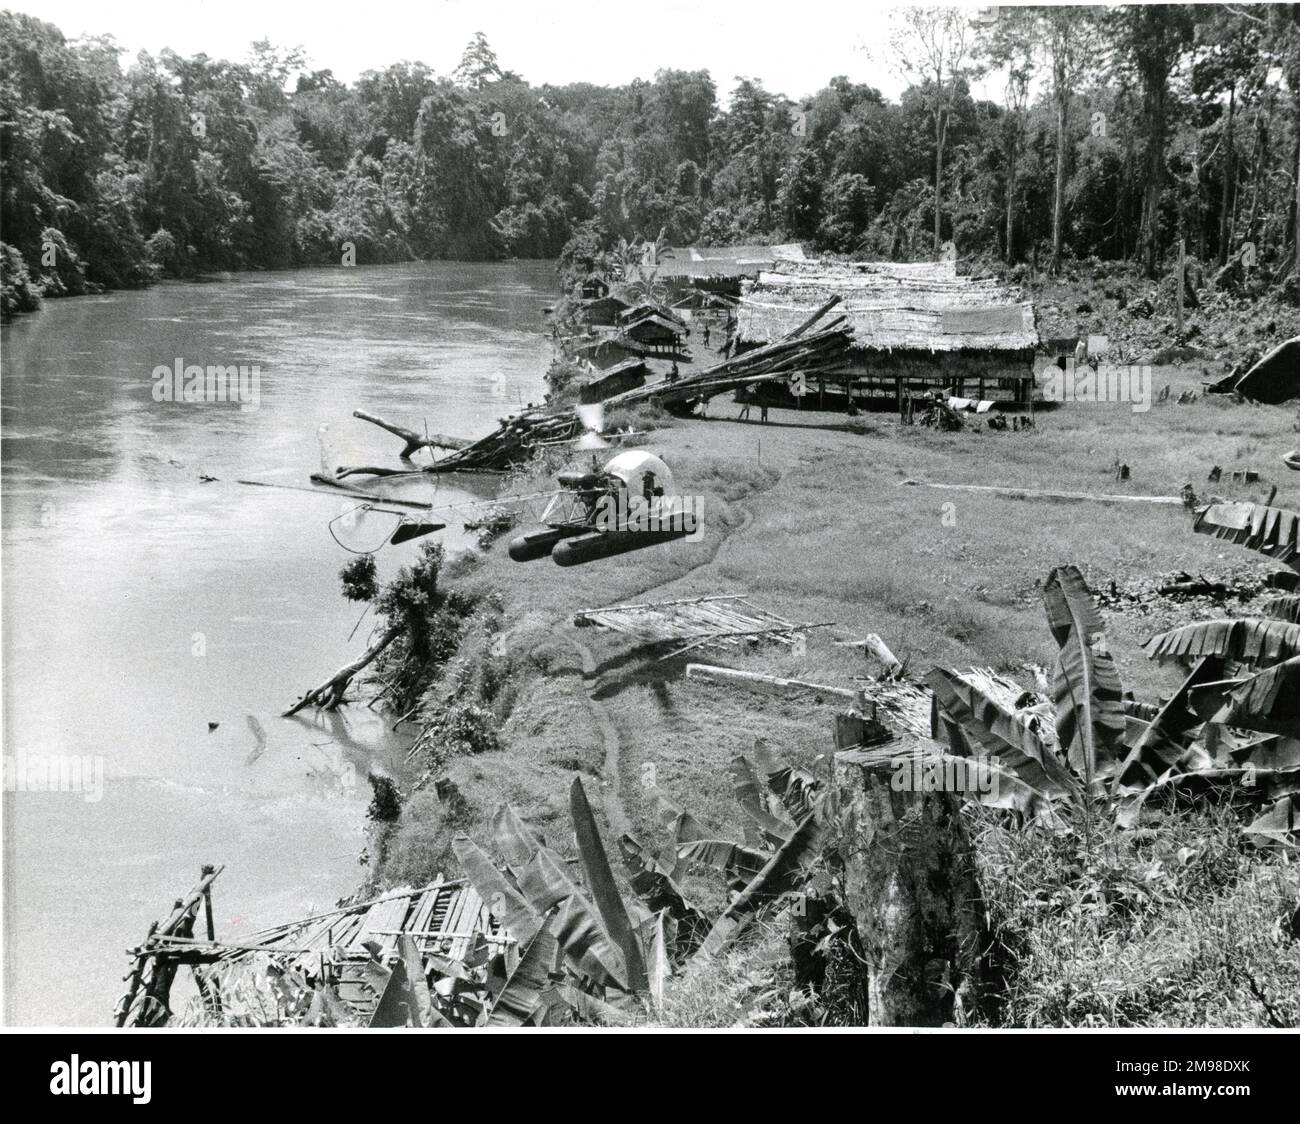 Bell Model 47 being used to aid the search for oil in Papua in 1954 lands near Seismic One Camp. Stock Photo